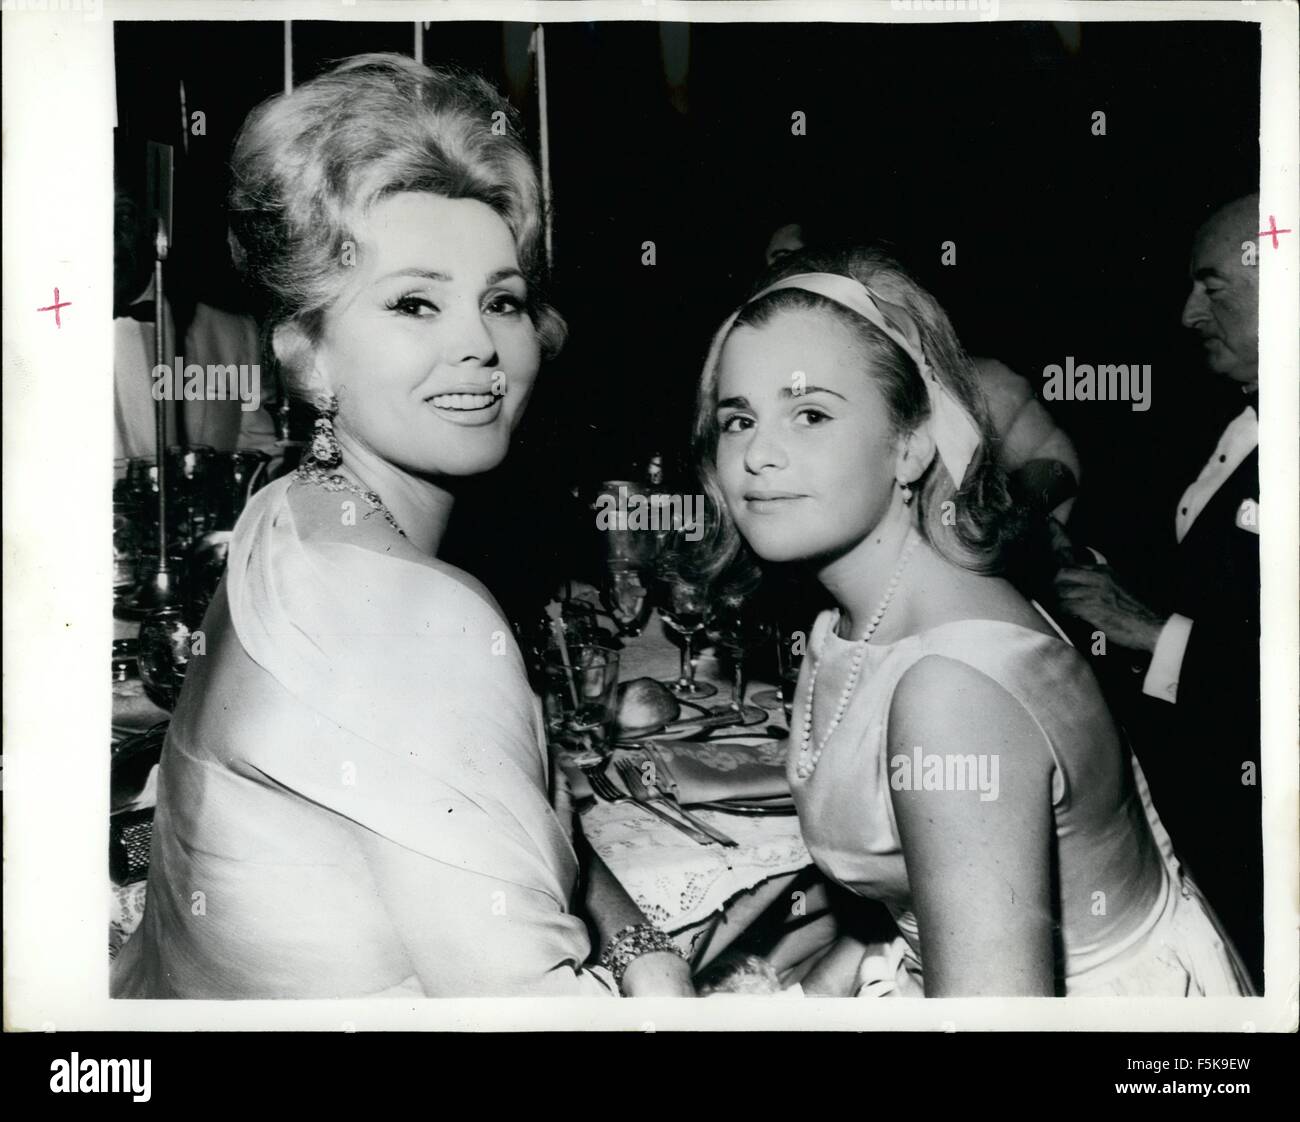 1975 - Zsa Zsa Attends Aniversary Banquet-In Hollywood: The City of Hope's Golden Anniversary banquet at the Beverly hilton Hotel, Hollywood-brought out a number of movie personalities-among whom were the ravishing Zsa Zsa Gabor and her daughter Francesca Hilton-who is also daughter of tycoon Conrad Hilton. many Cinema notables were honoured at the banquet. © Keystone Pictures USA/ZUMAPRESS.com/Alamy Live News Stock Photo